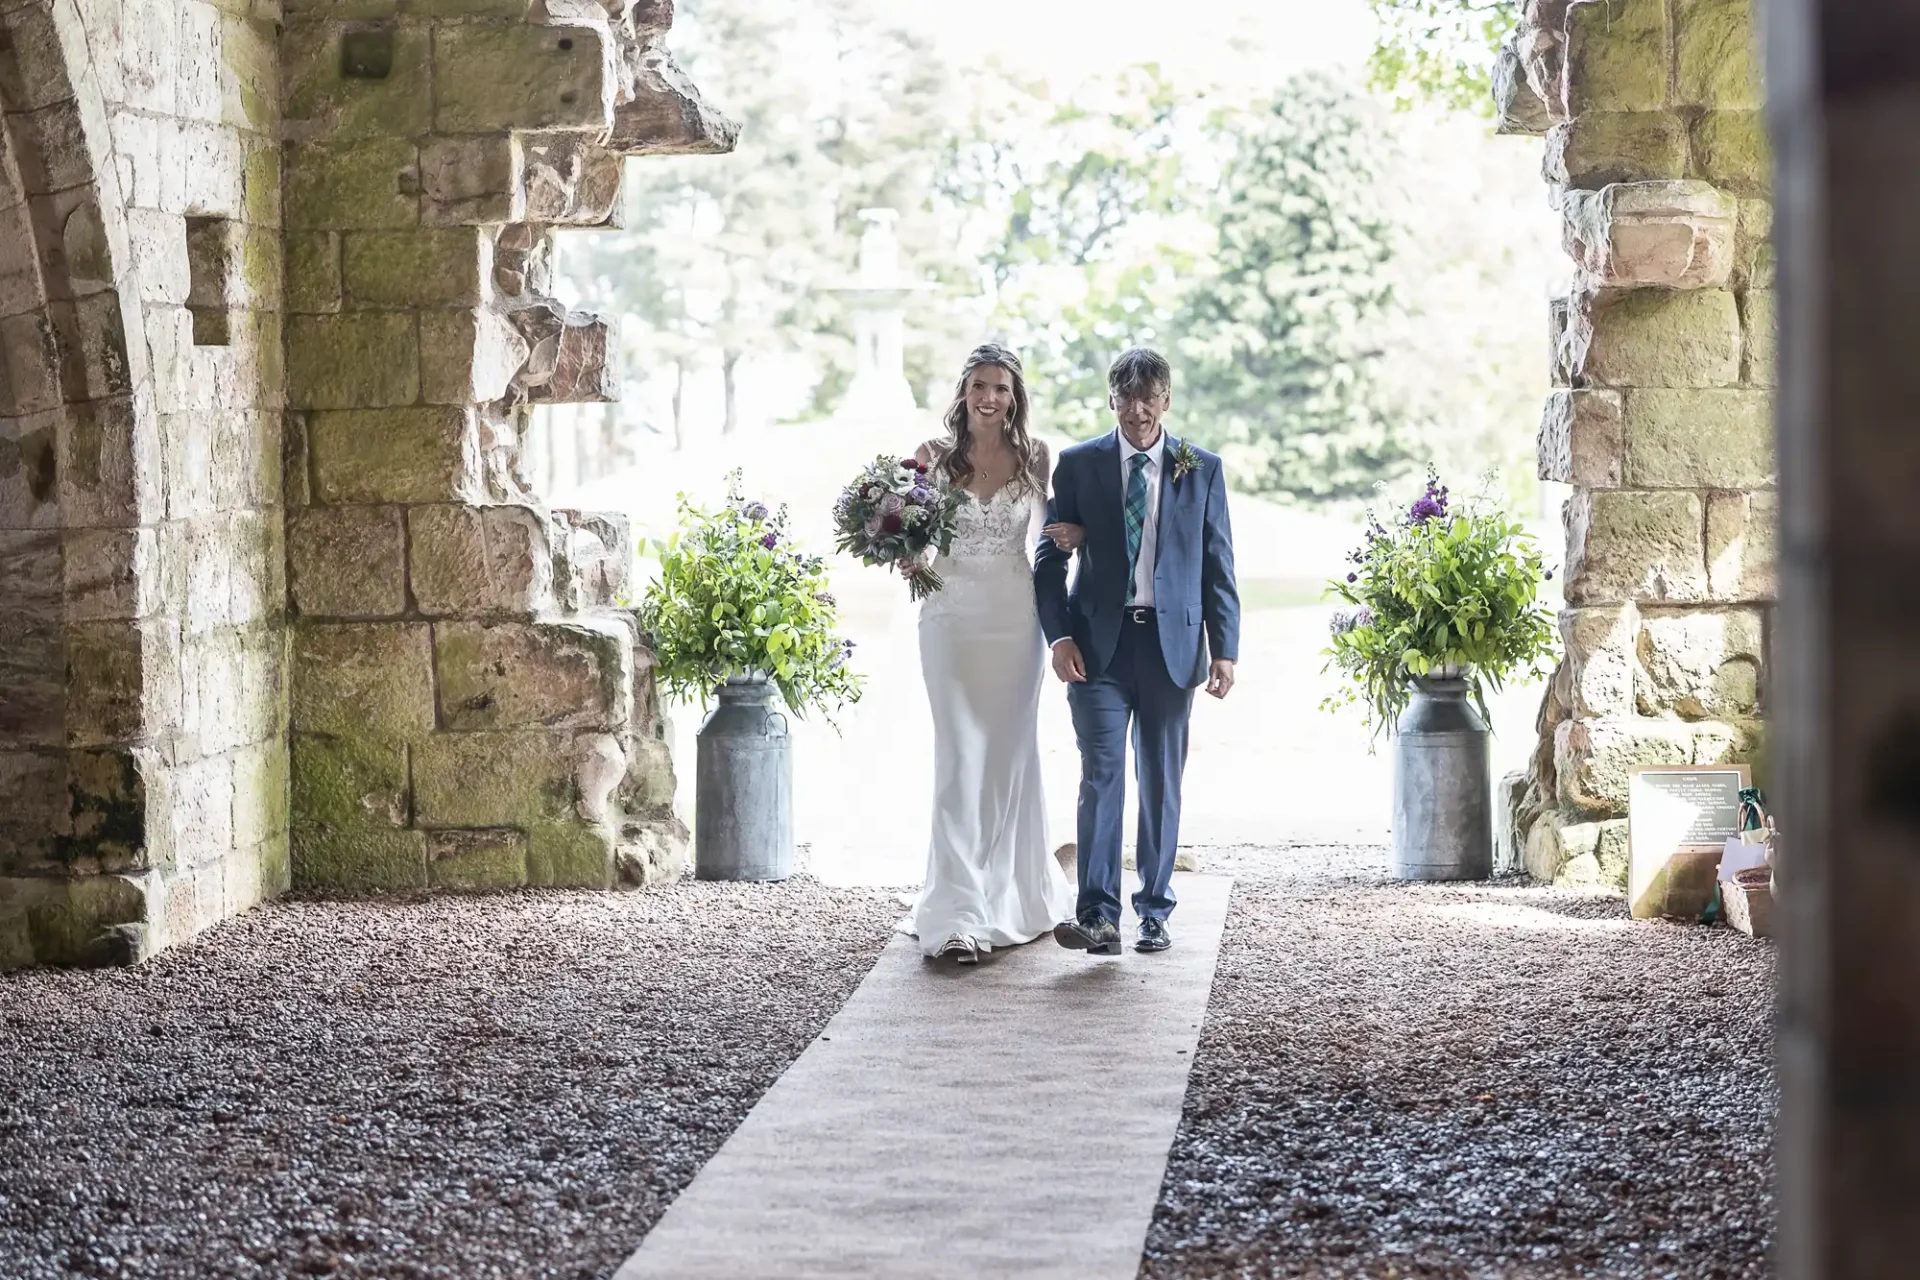 A bride and an older man walk down an outdoor aisle. The bride wears a white dress and holds a bouquet. They are framed by stone archways and greenery.